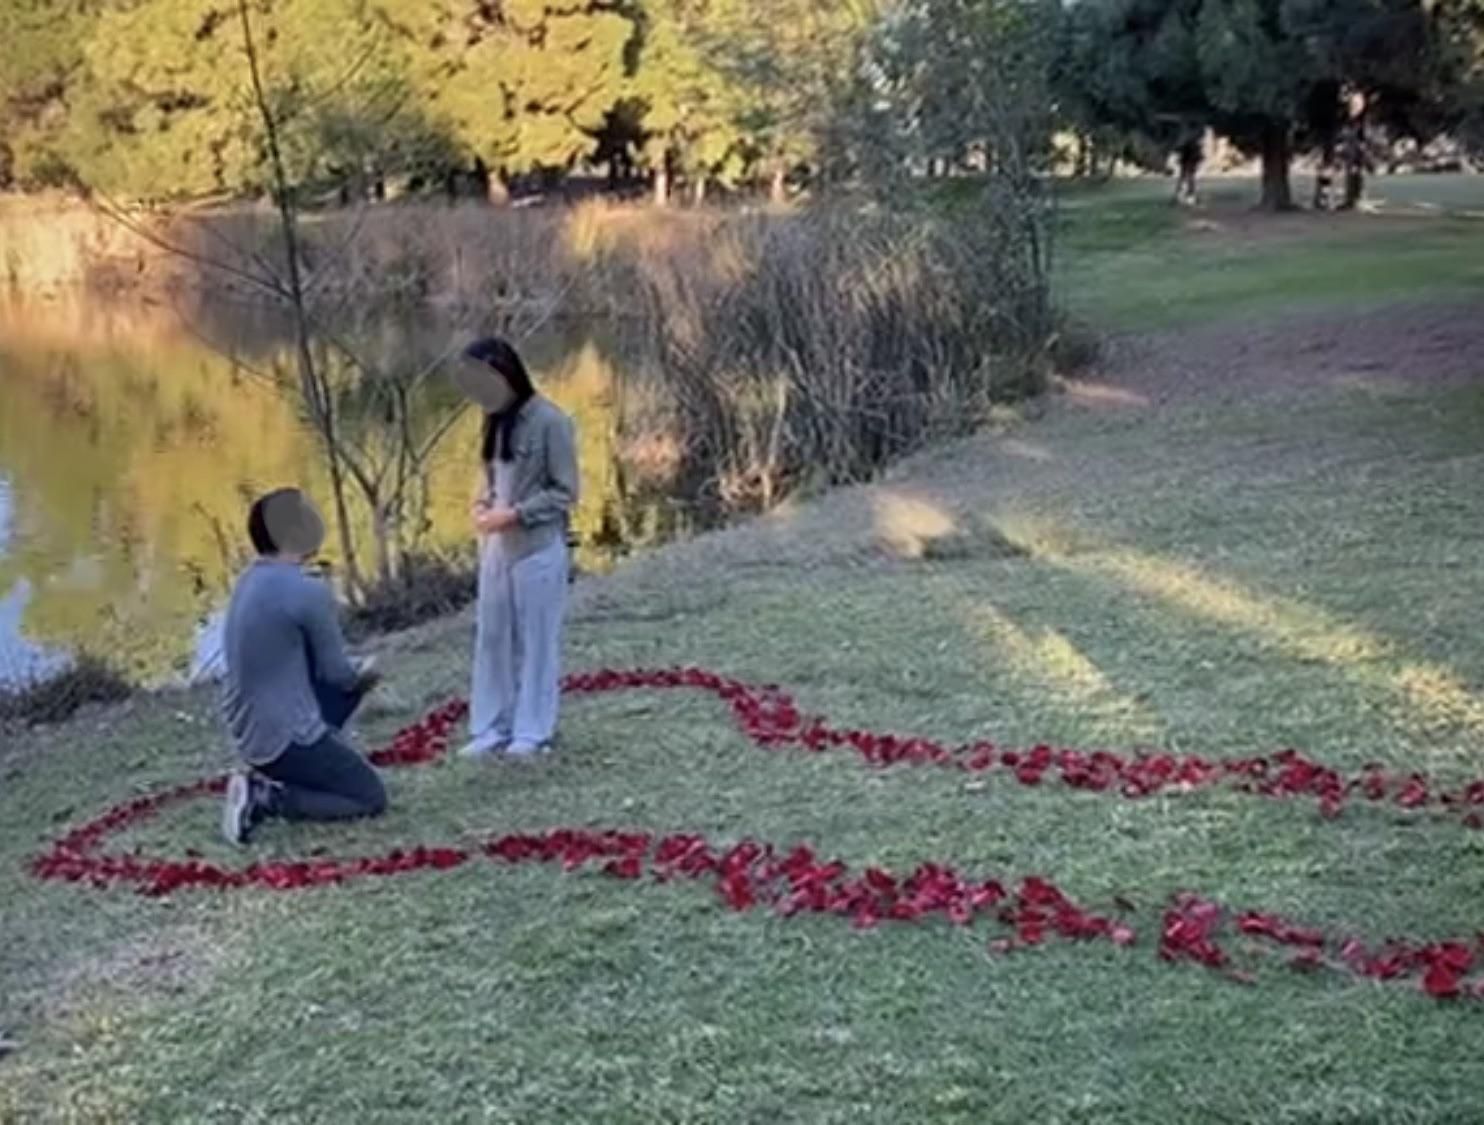 My gf was in charge of setting up the rose petals for her roommate’s engagement. This is how it turned out.